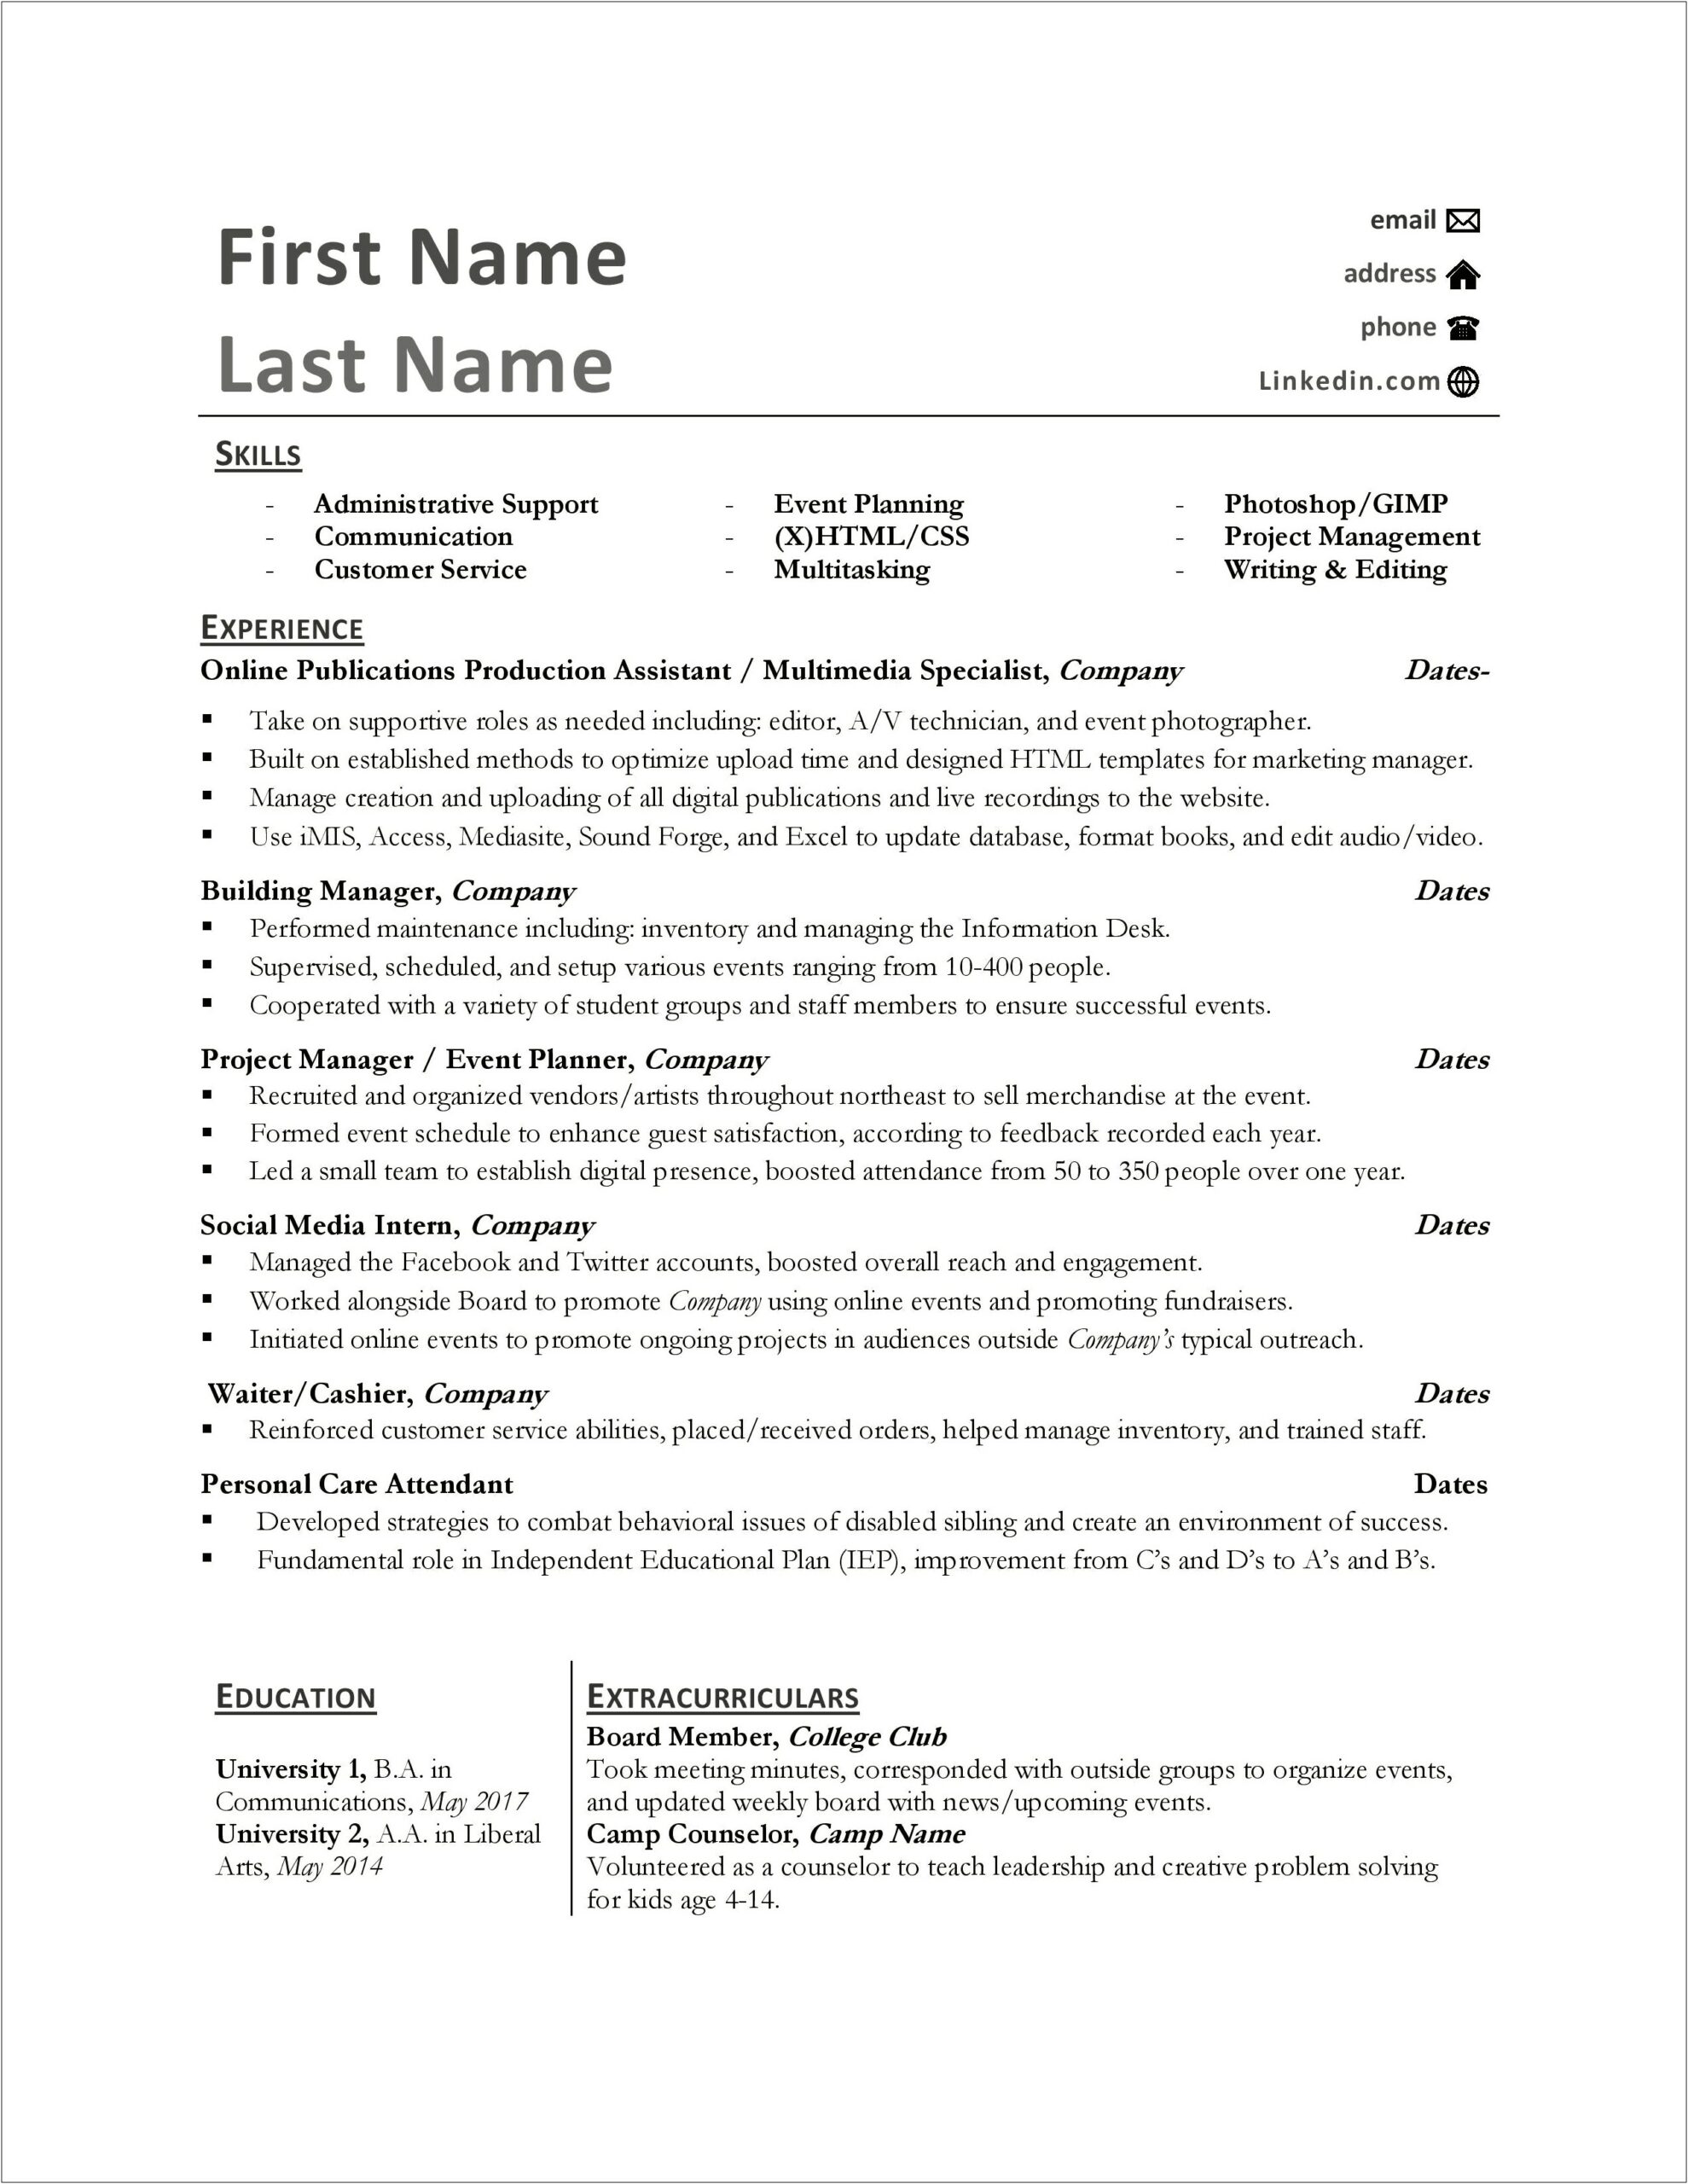 Resume Example For Applying Within The Same Company